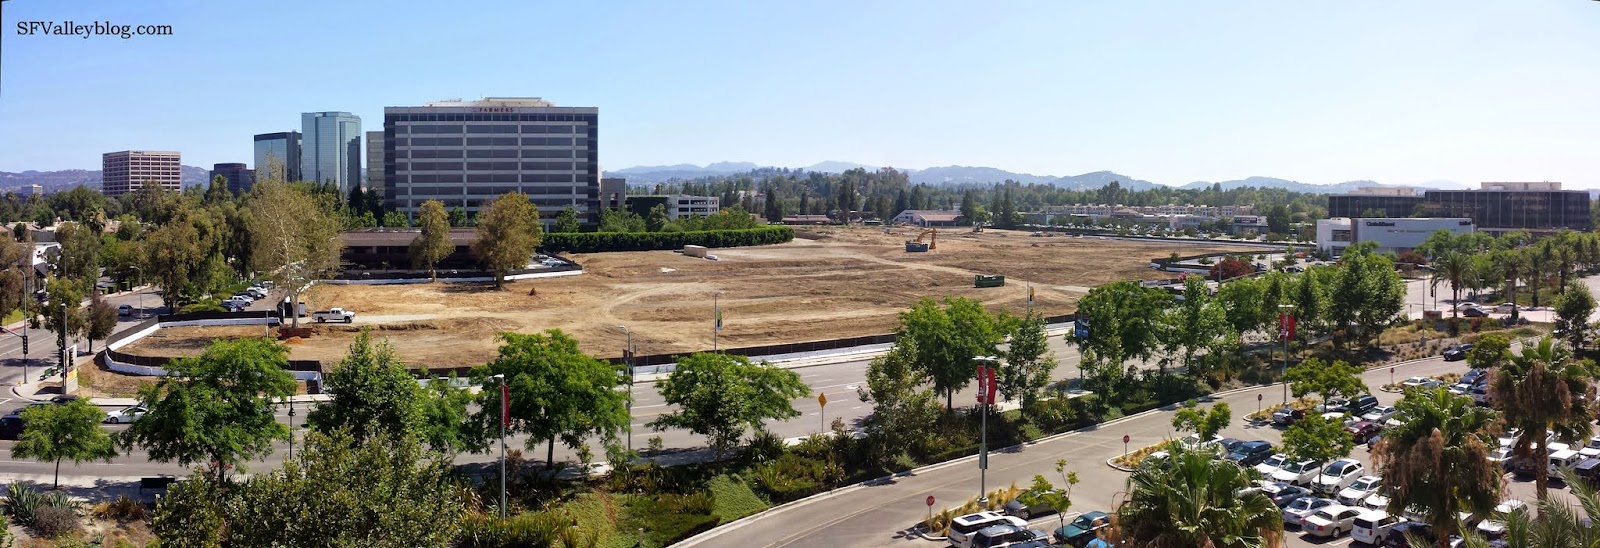 Westfield Topanga Mall, Demolition continues at the Westfie…